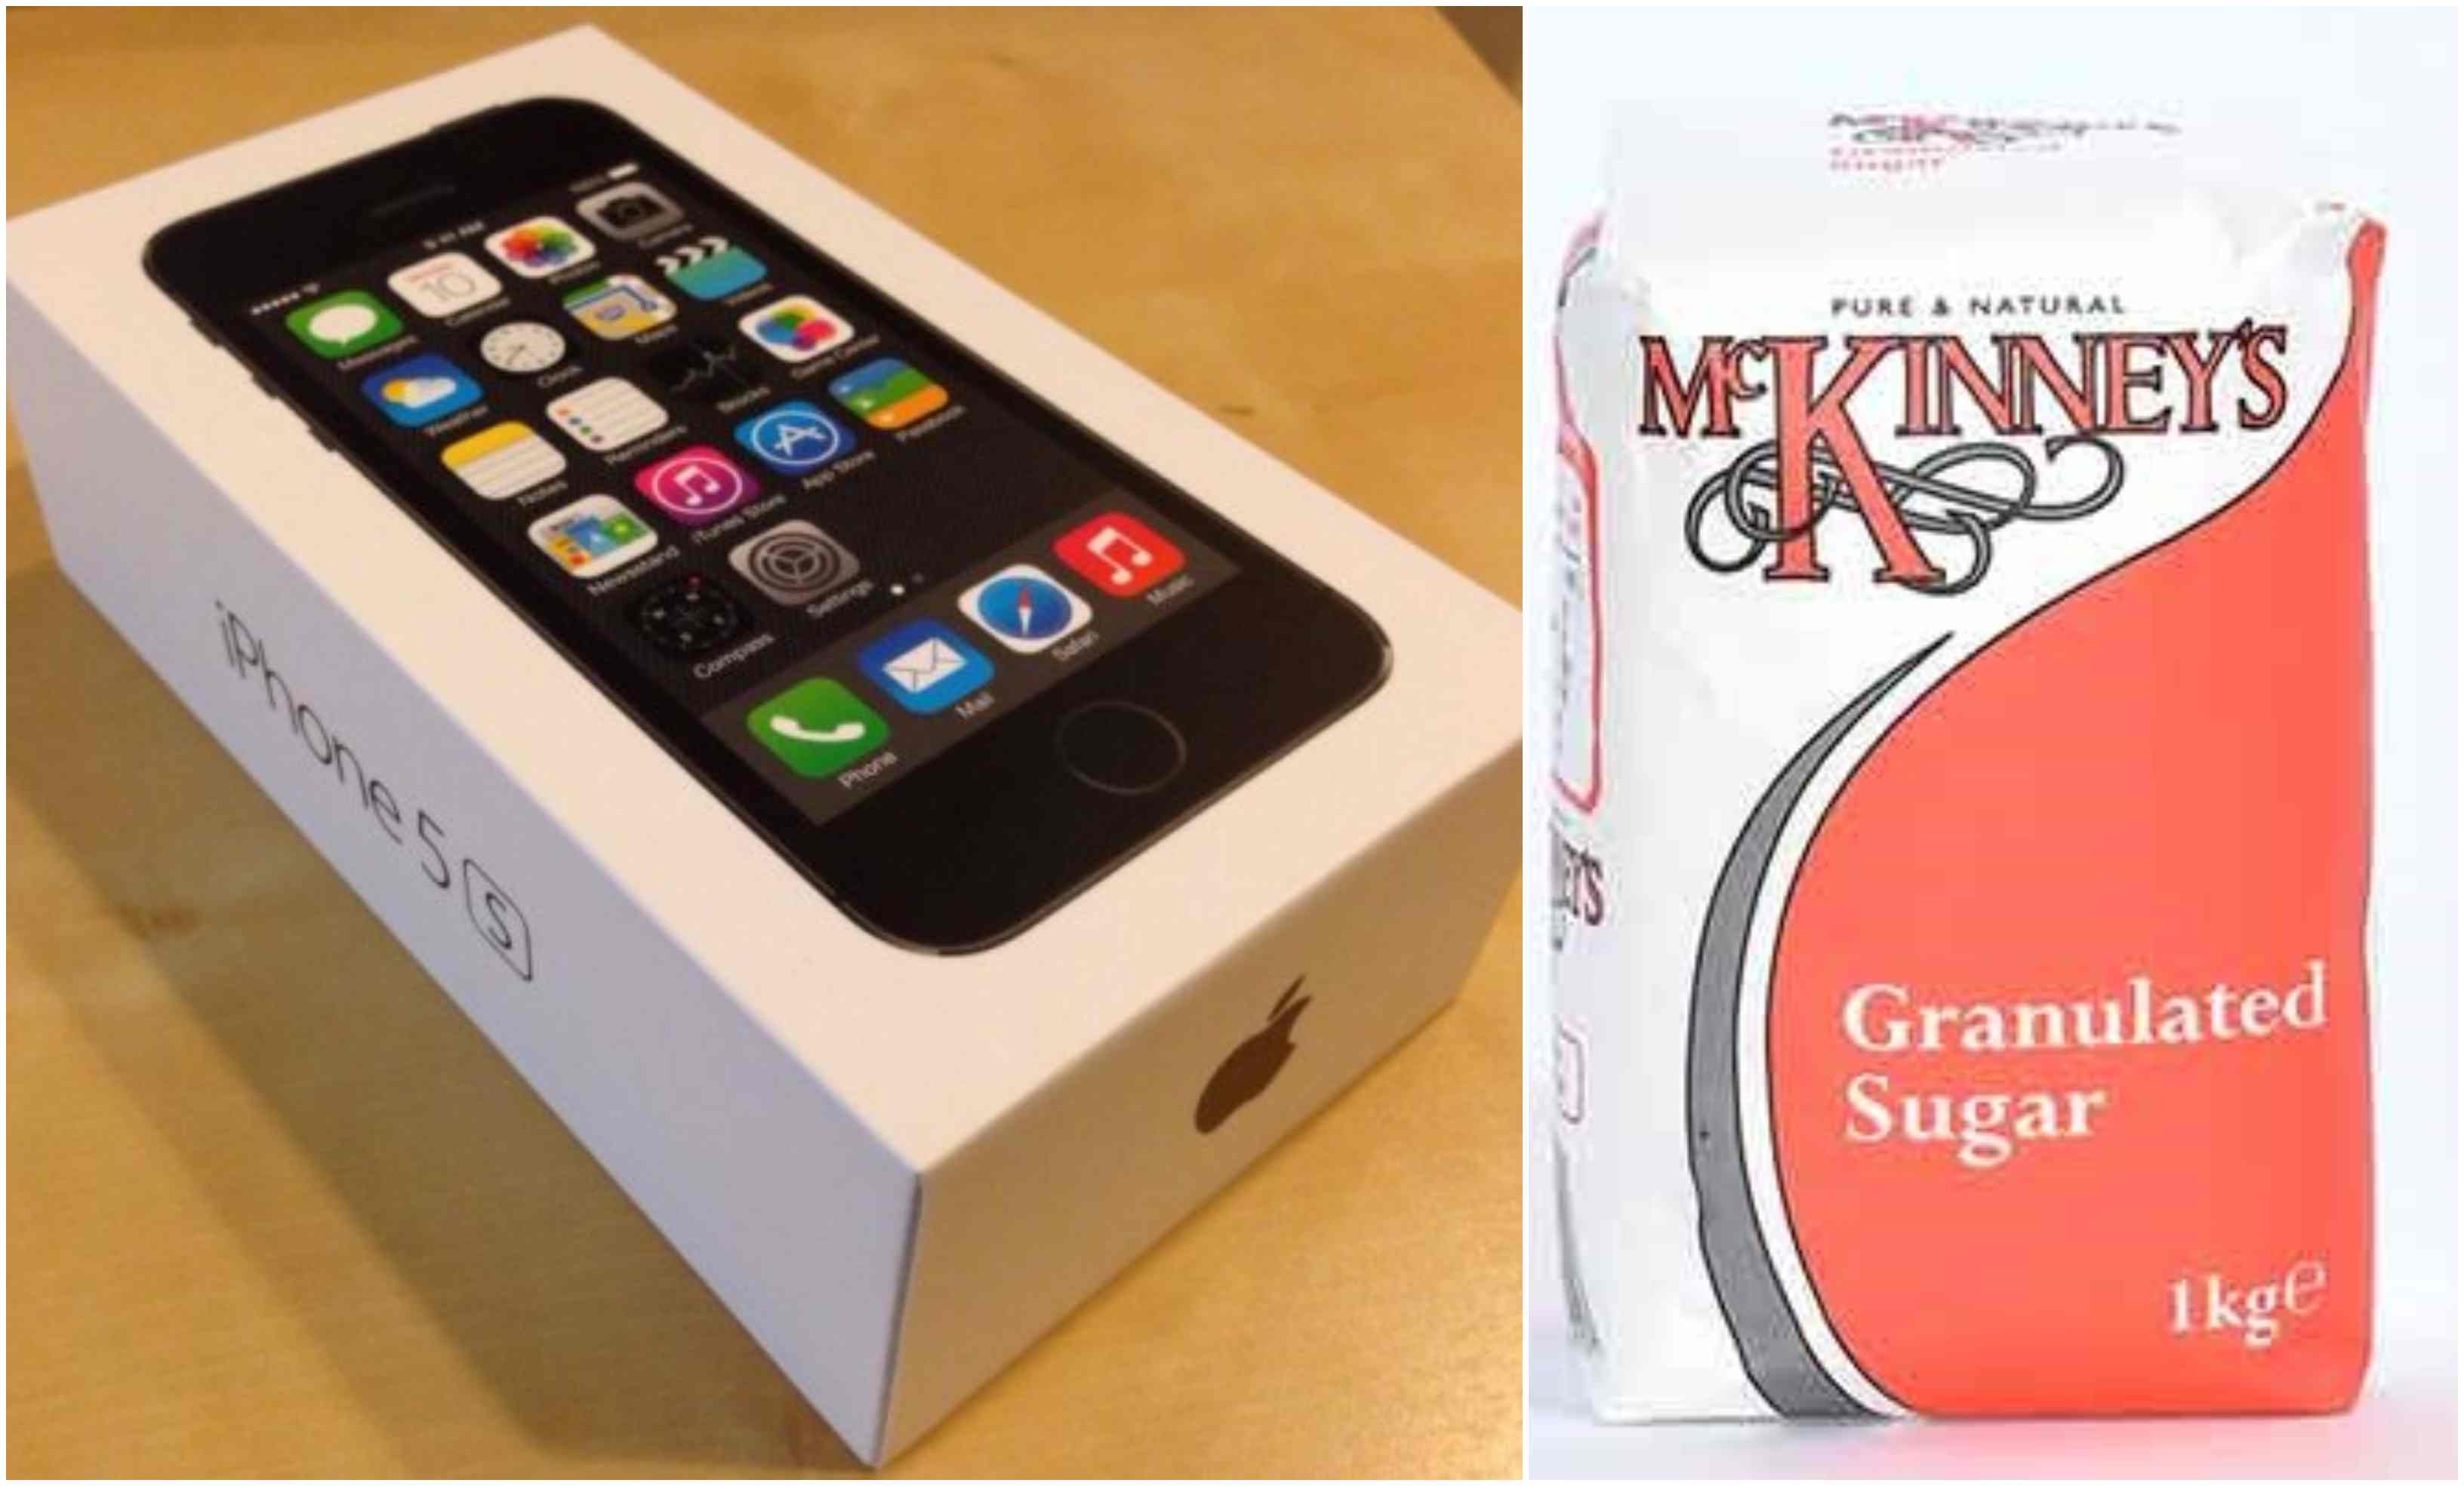 Unsuspecting victim duped into paying €700 for bag of sugar instead of iPhone